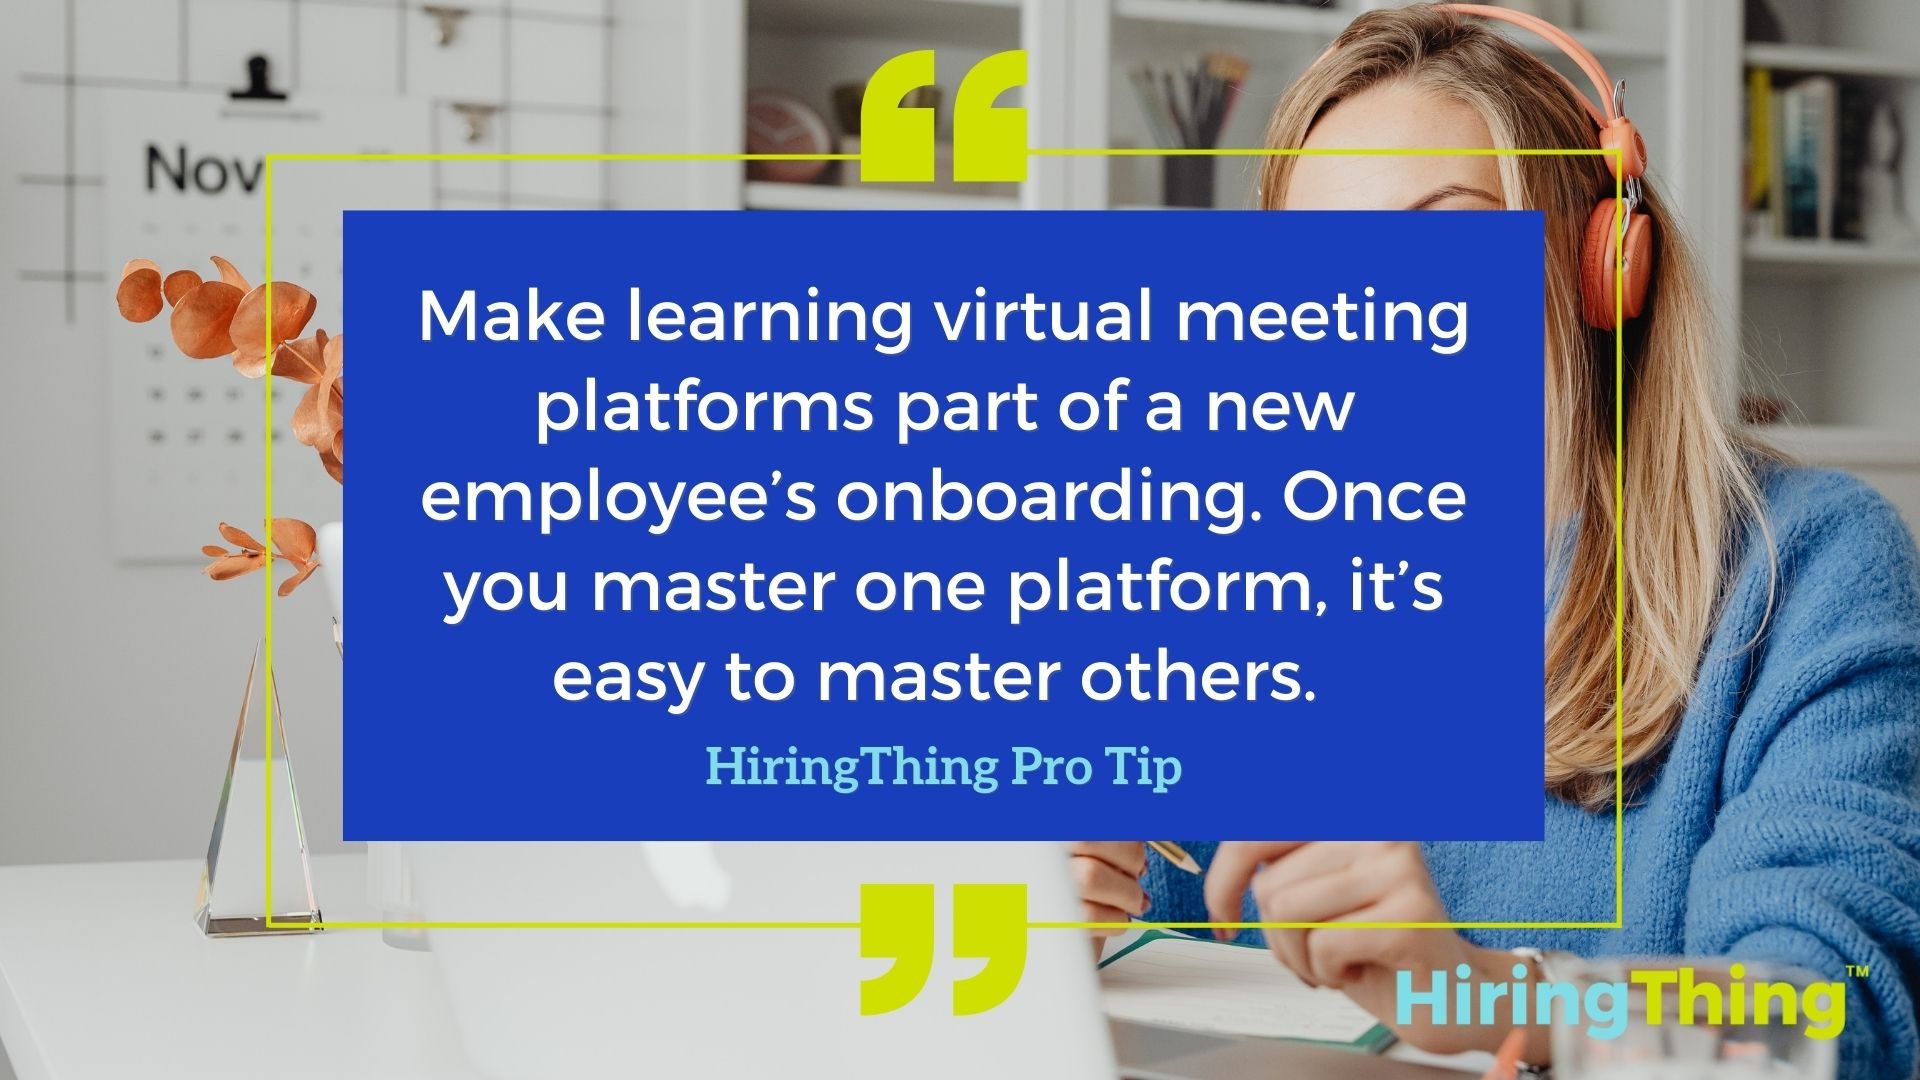 HiringThing Pro Tip: Make learning virtual meeting platforms part of a new employee’s onboarding. Once you master one platform, it’s easy to master others. 